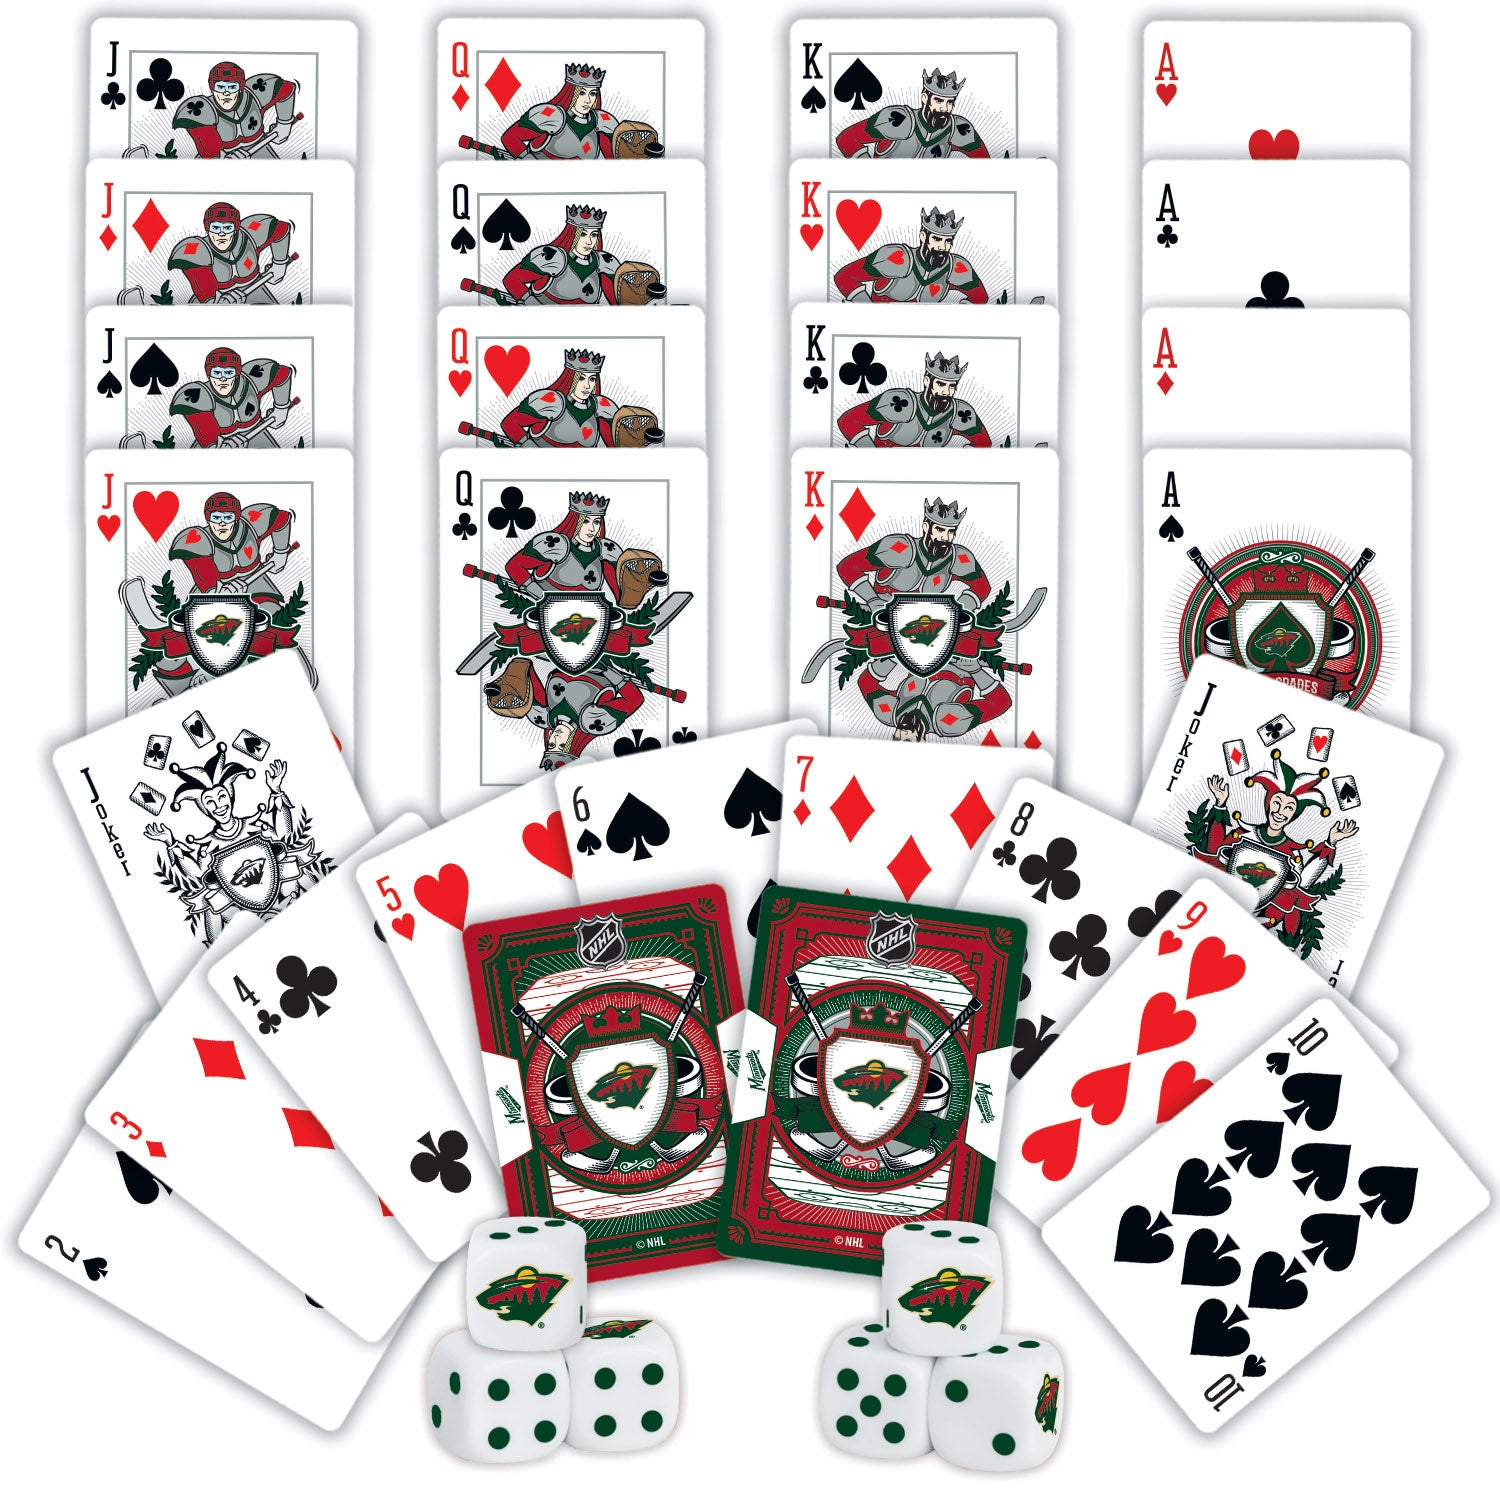 Minnesota Wild - 2-Pack Playing Cards & Dice Set